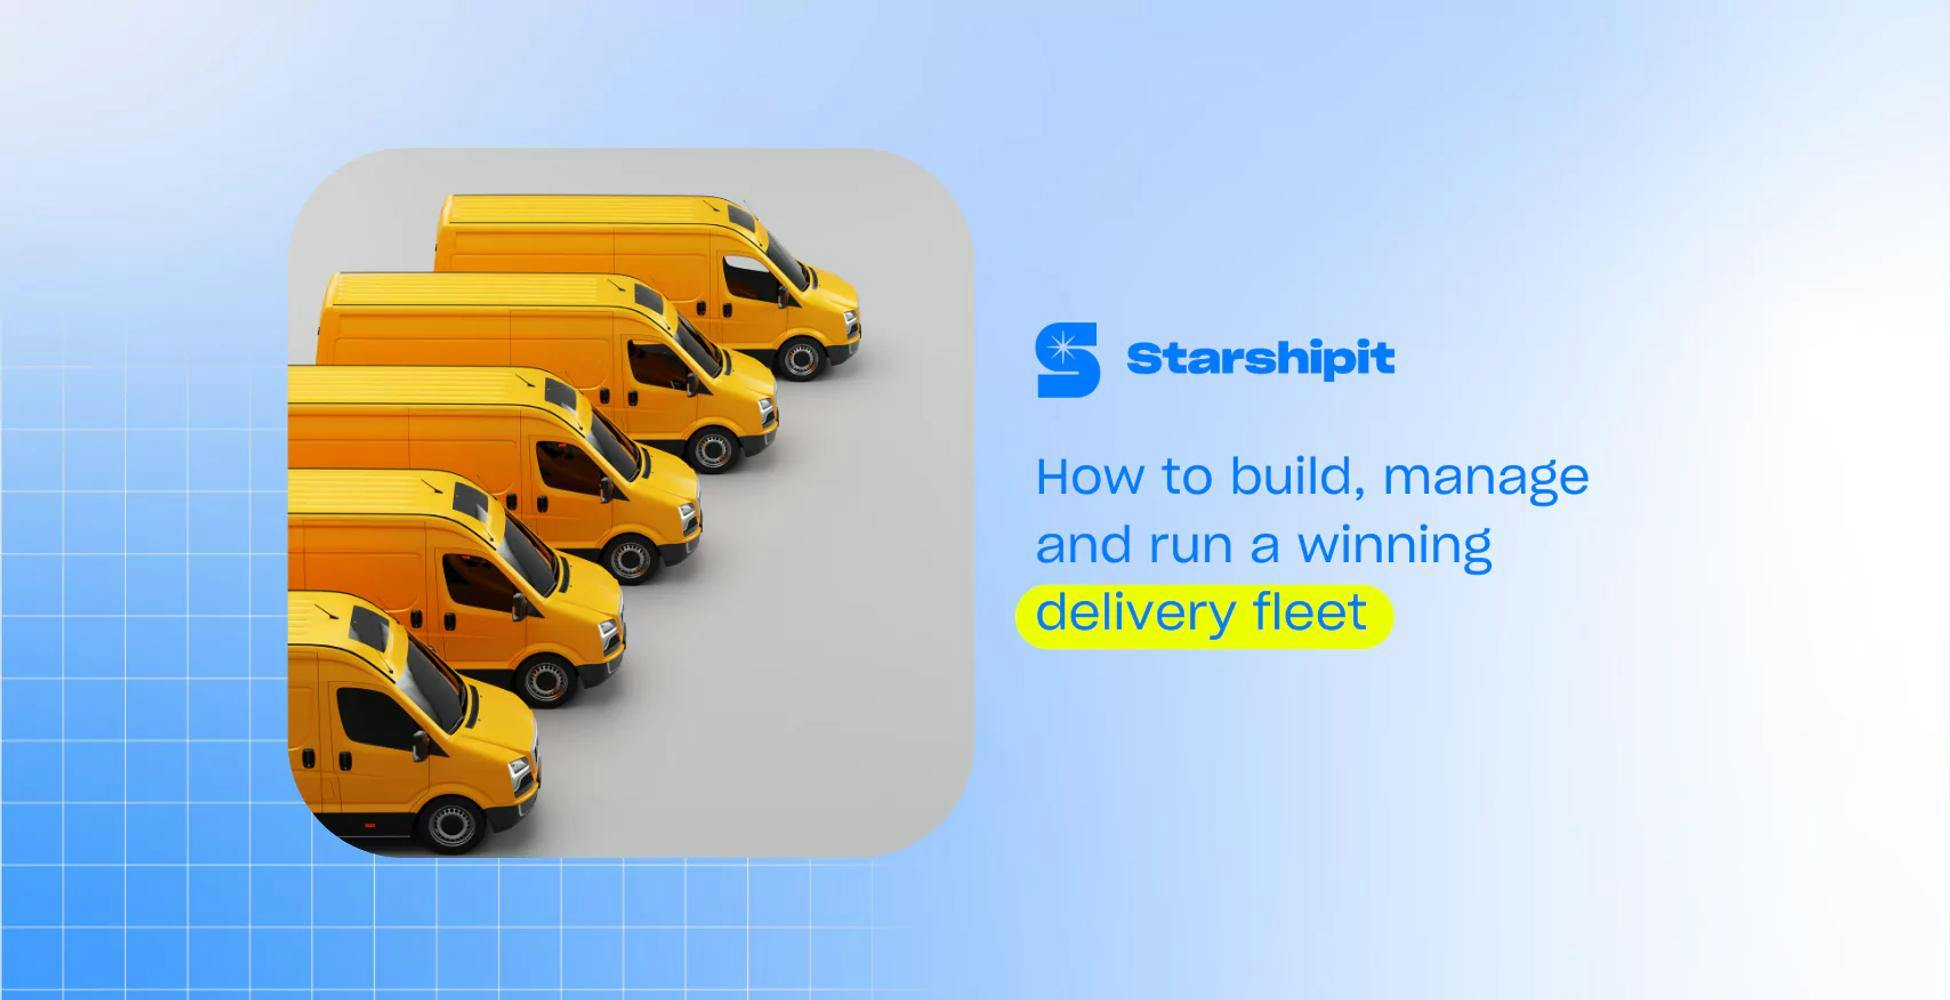 How to build, manage, and run a winning delivery fleet